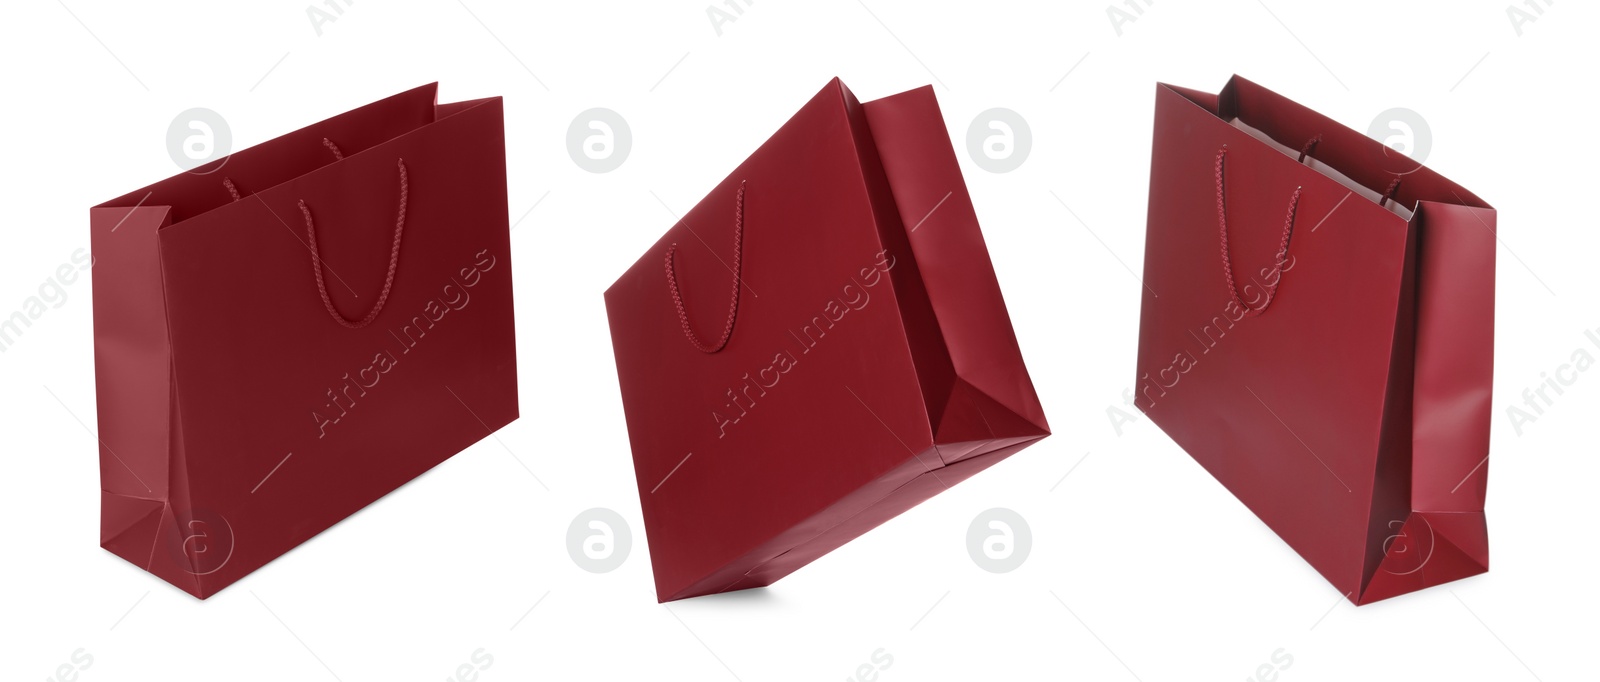 Image of Red shopping bag isolated on white, different sides